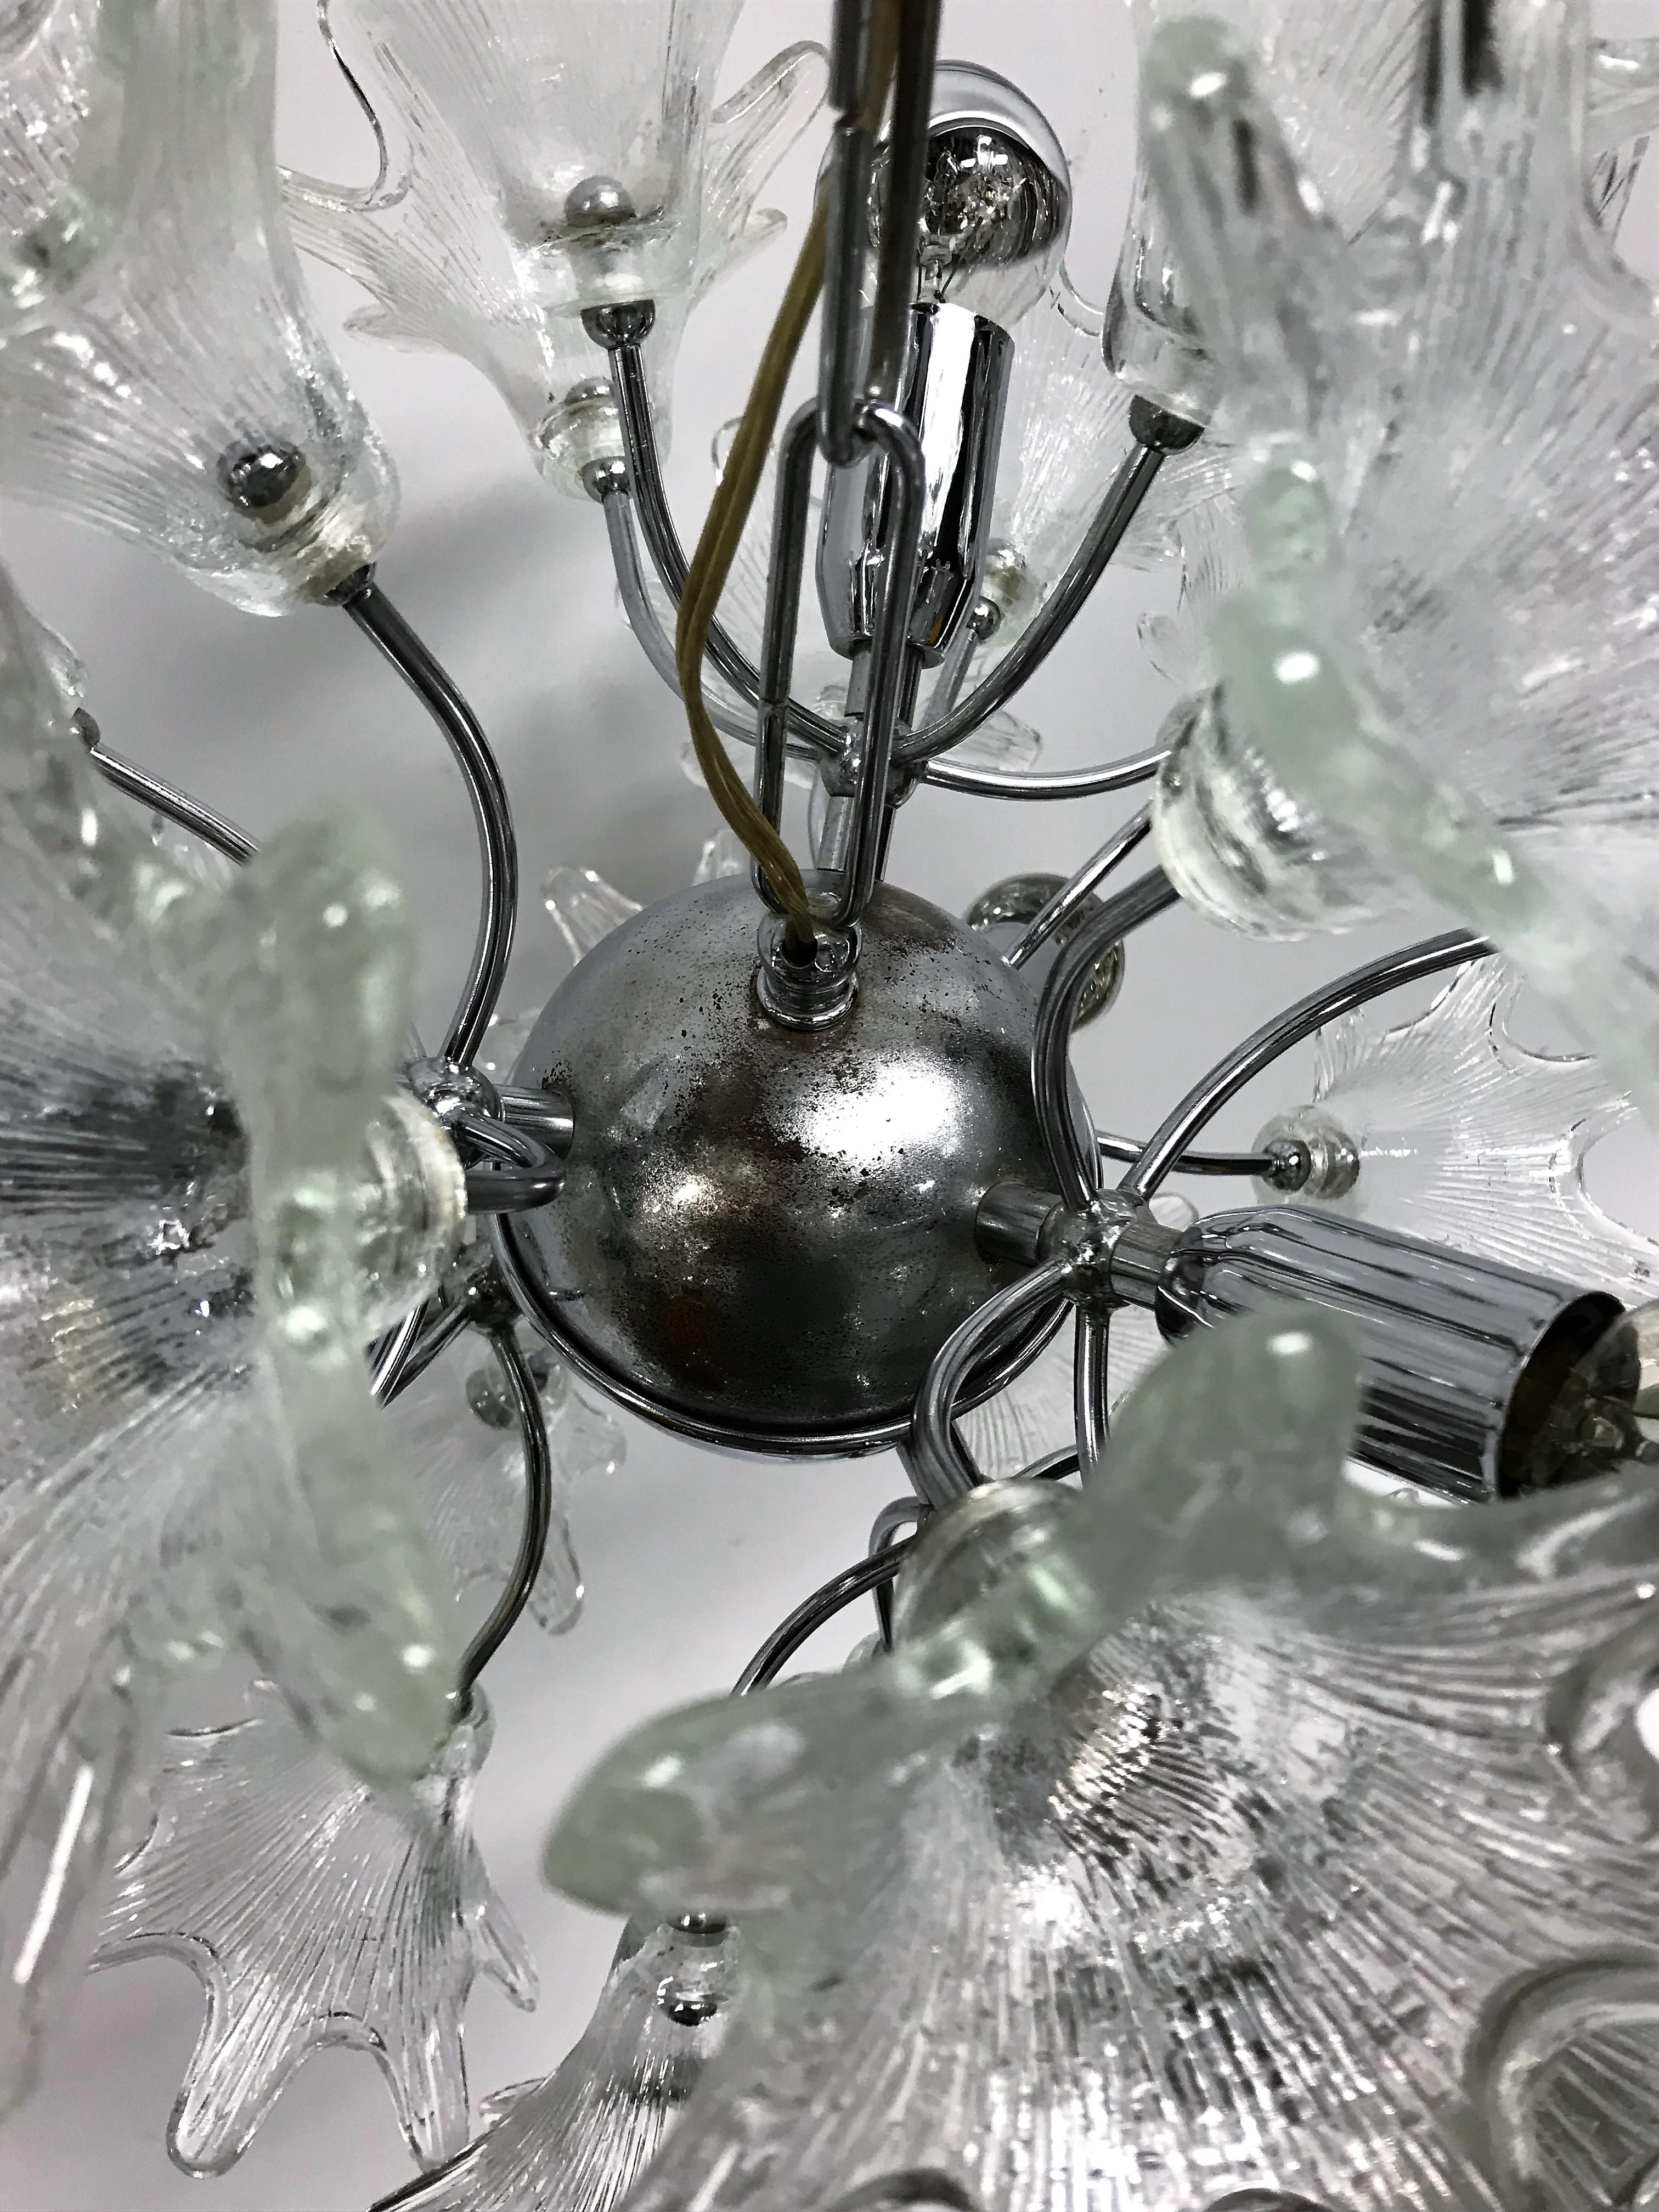 Vintage floral design Sputnik chandelier with hand blown crystal flower shaped glasses.

The chandelier has a chromed base and arms with beautiful patina.

All glasses are damage free and because they are handmade some may vary slightly in